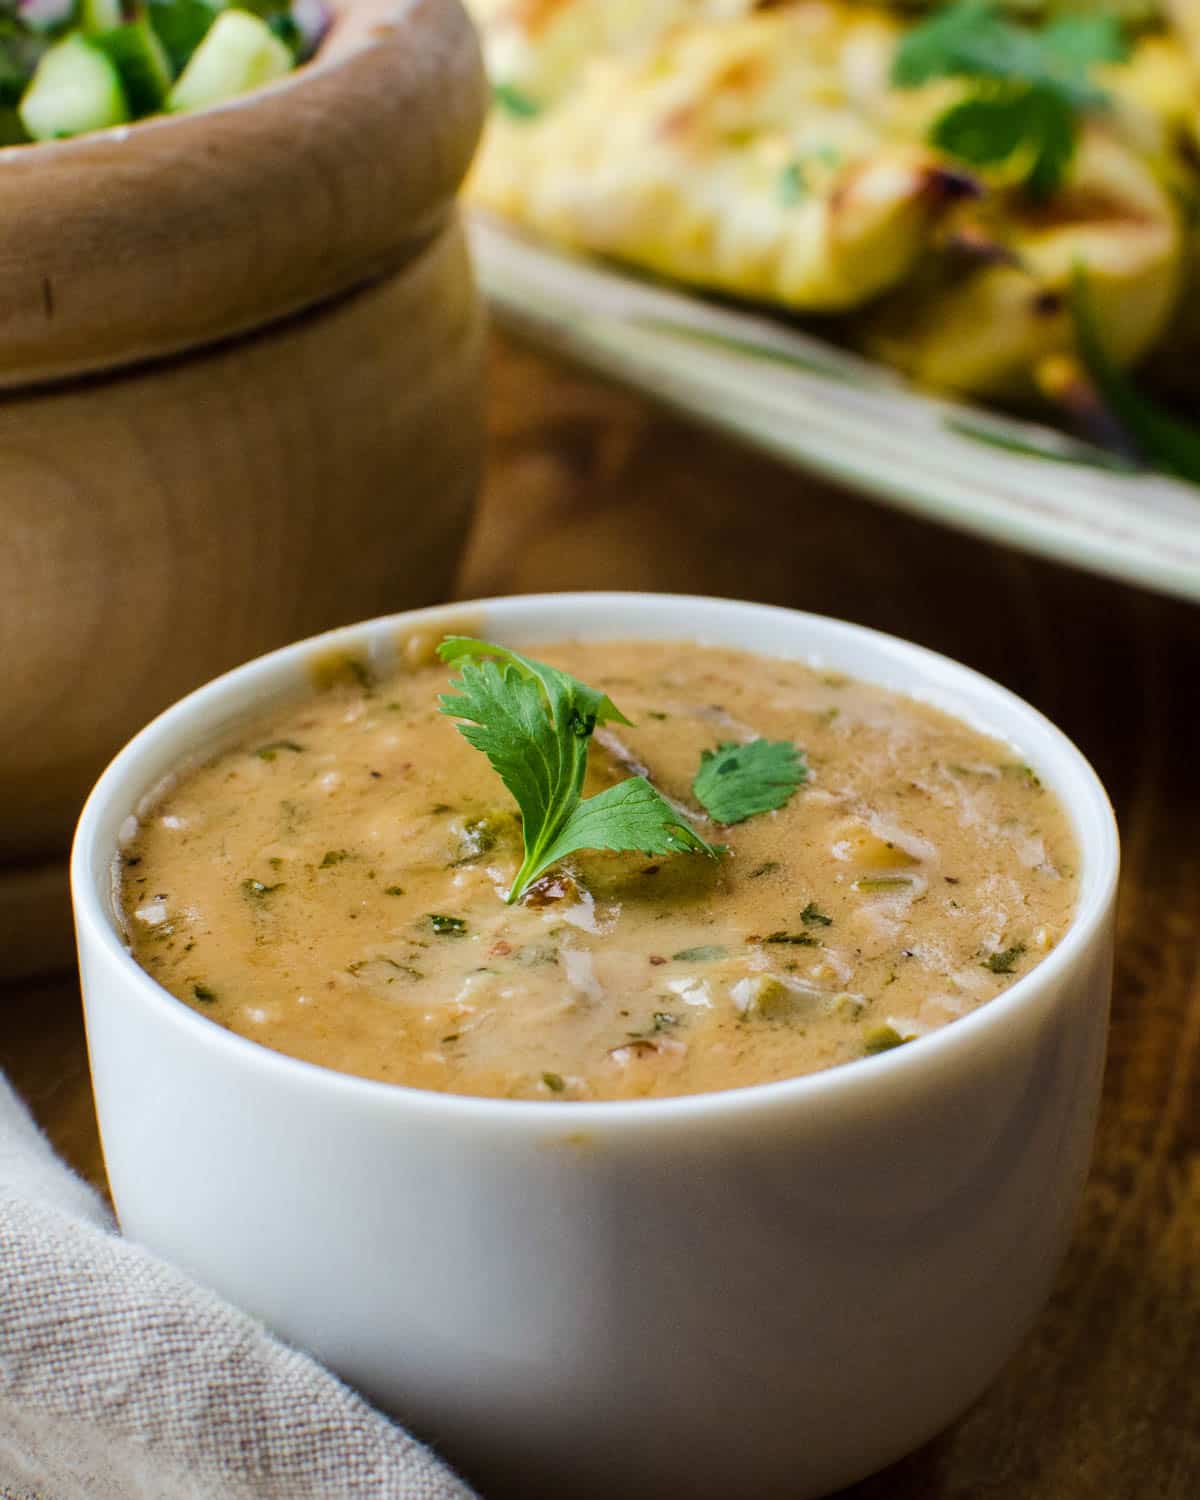 The peanut satay dipping sauce in a white bowl.